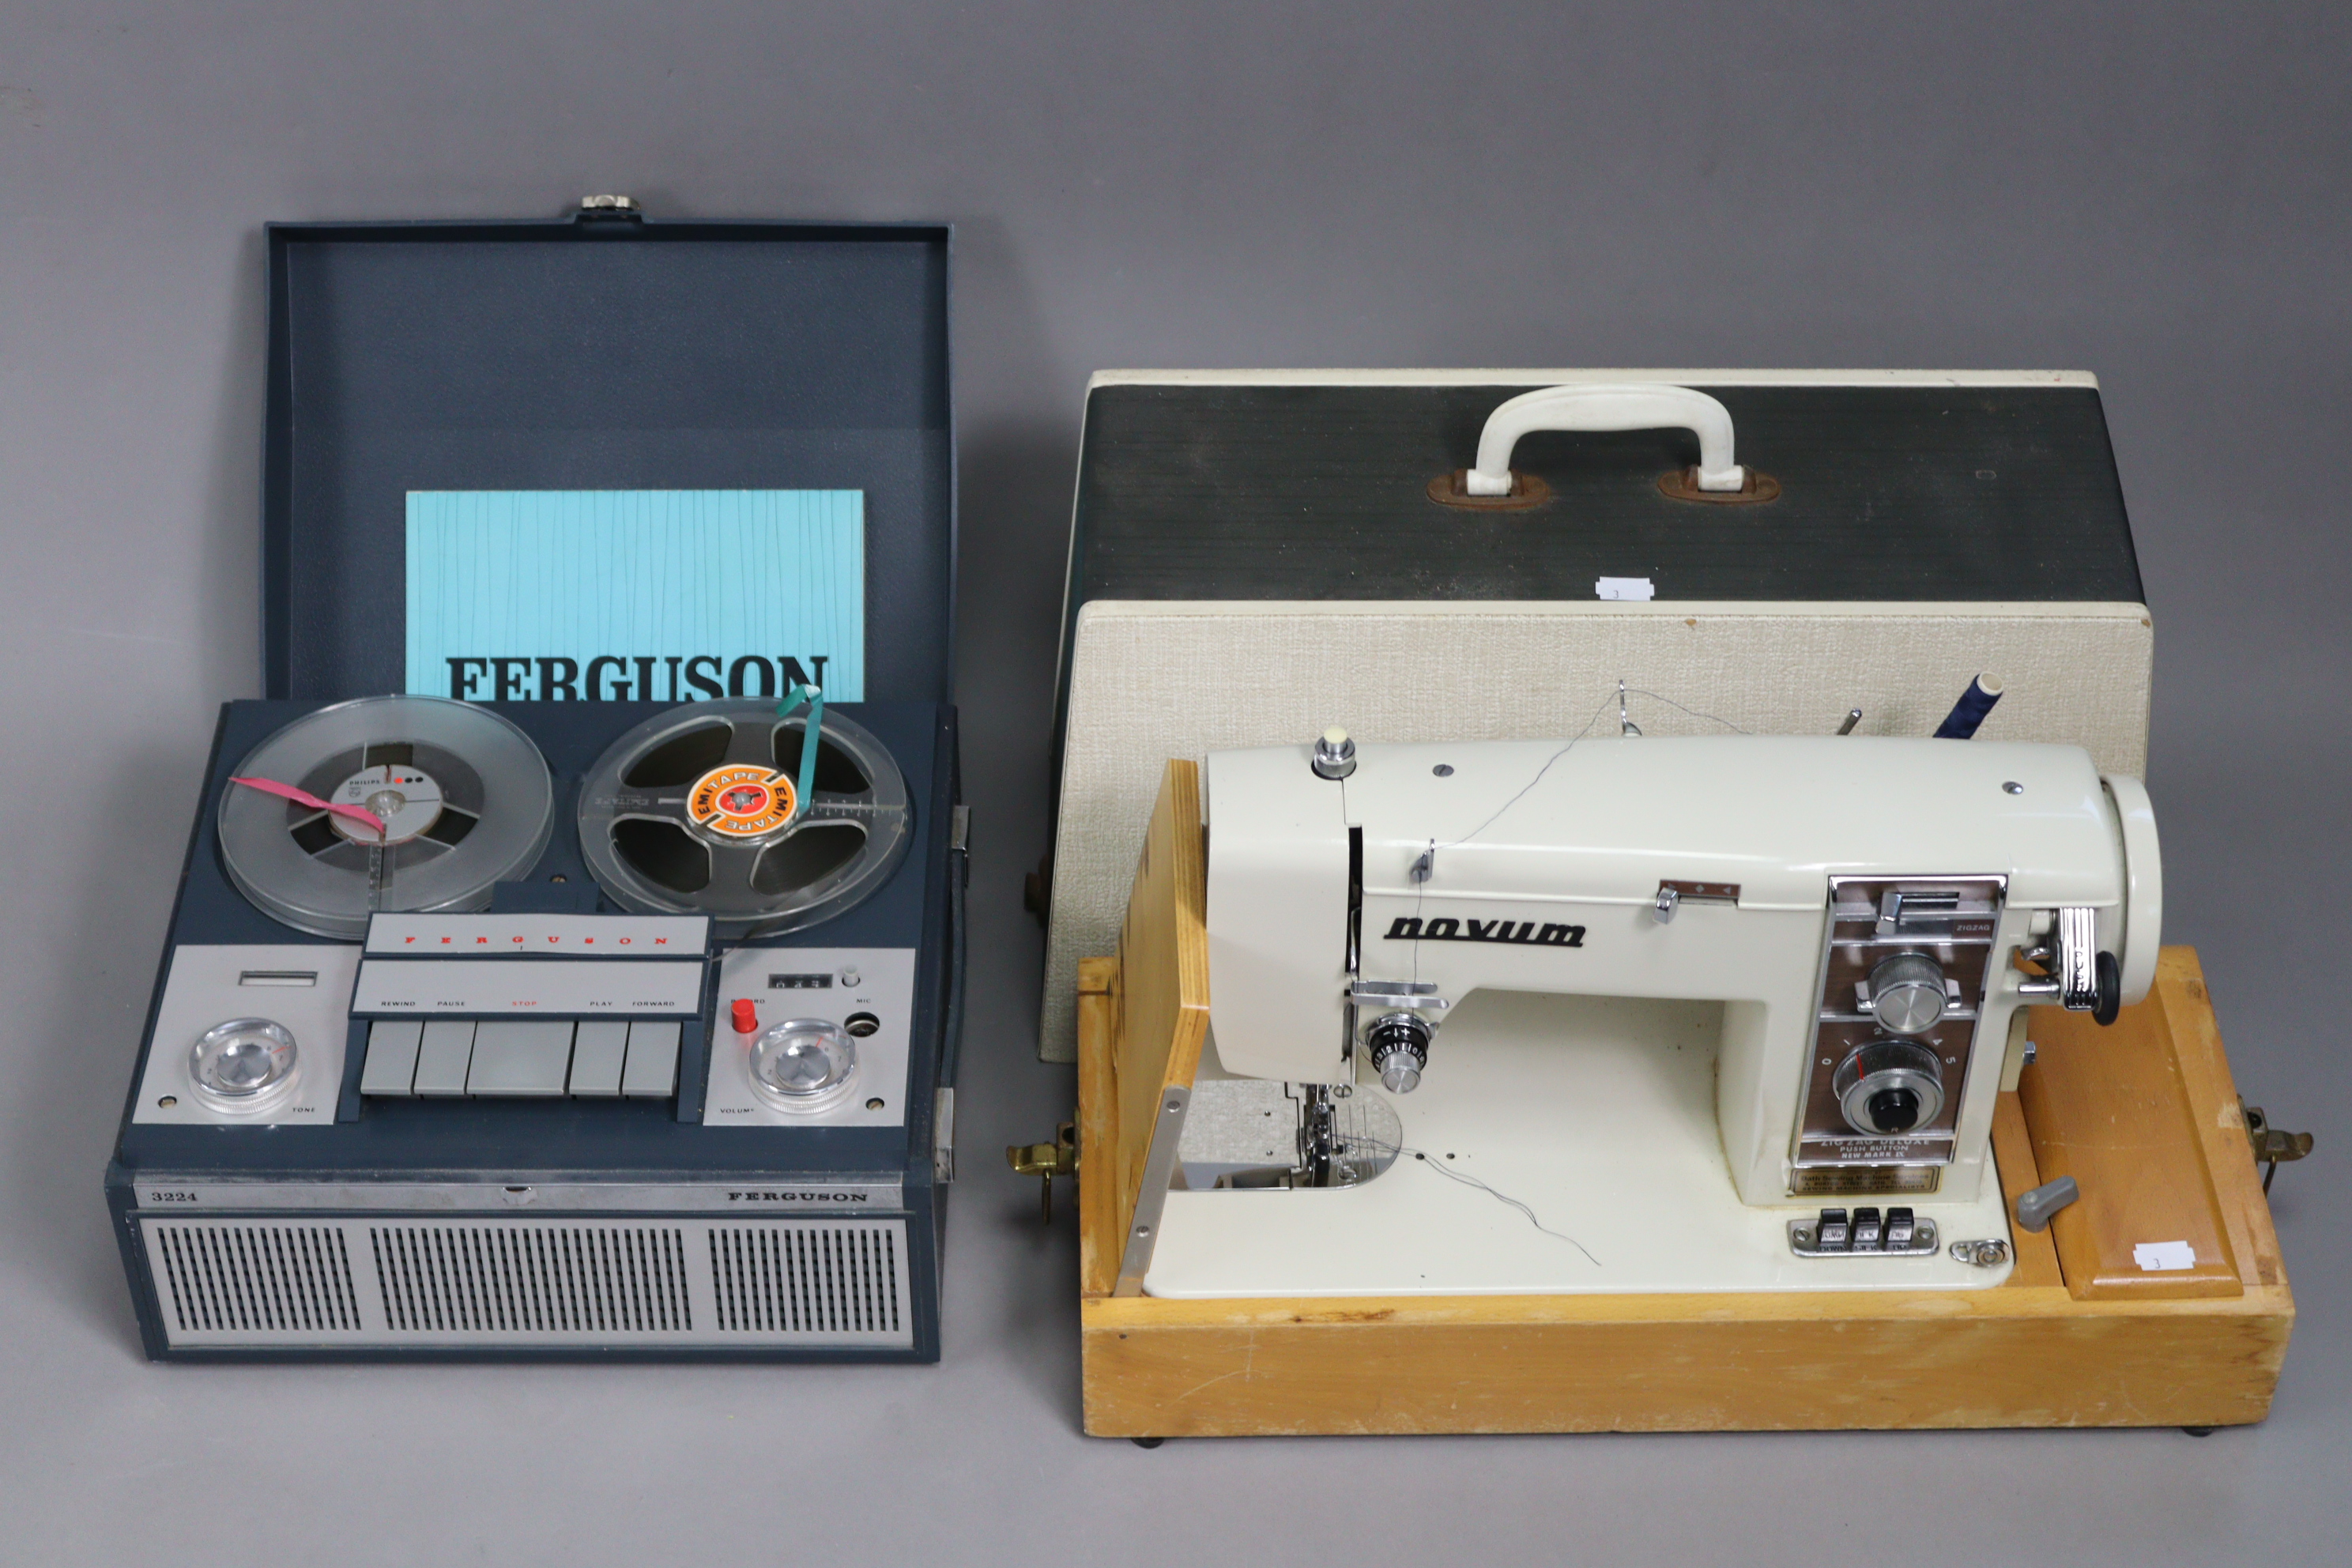 A Ferguson “3224” reel-to-reel portable tape recorder, & a Novum Zig Zag deluxe electric sewing